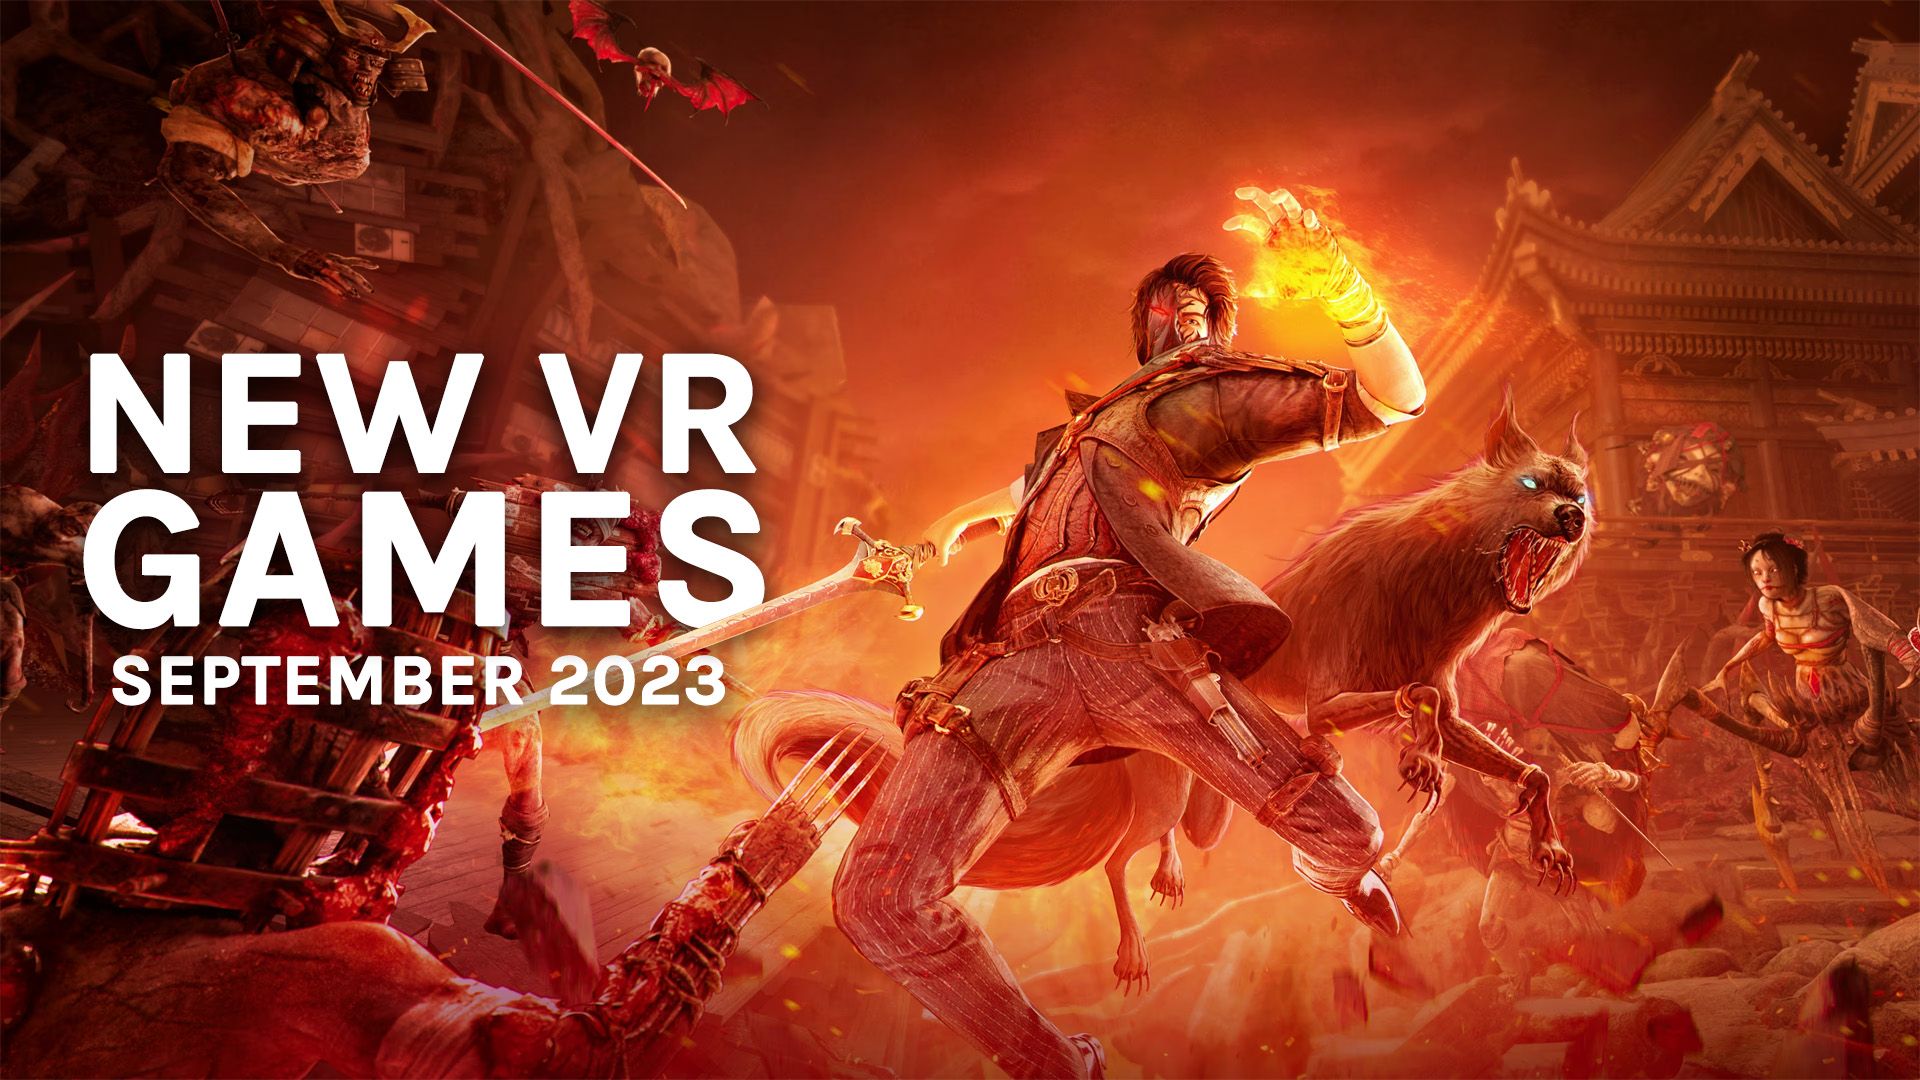 Upcoming VR Games 2023: New Releases On Quest, PC, PSVR 2 & More